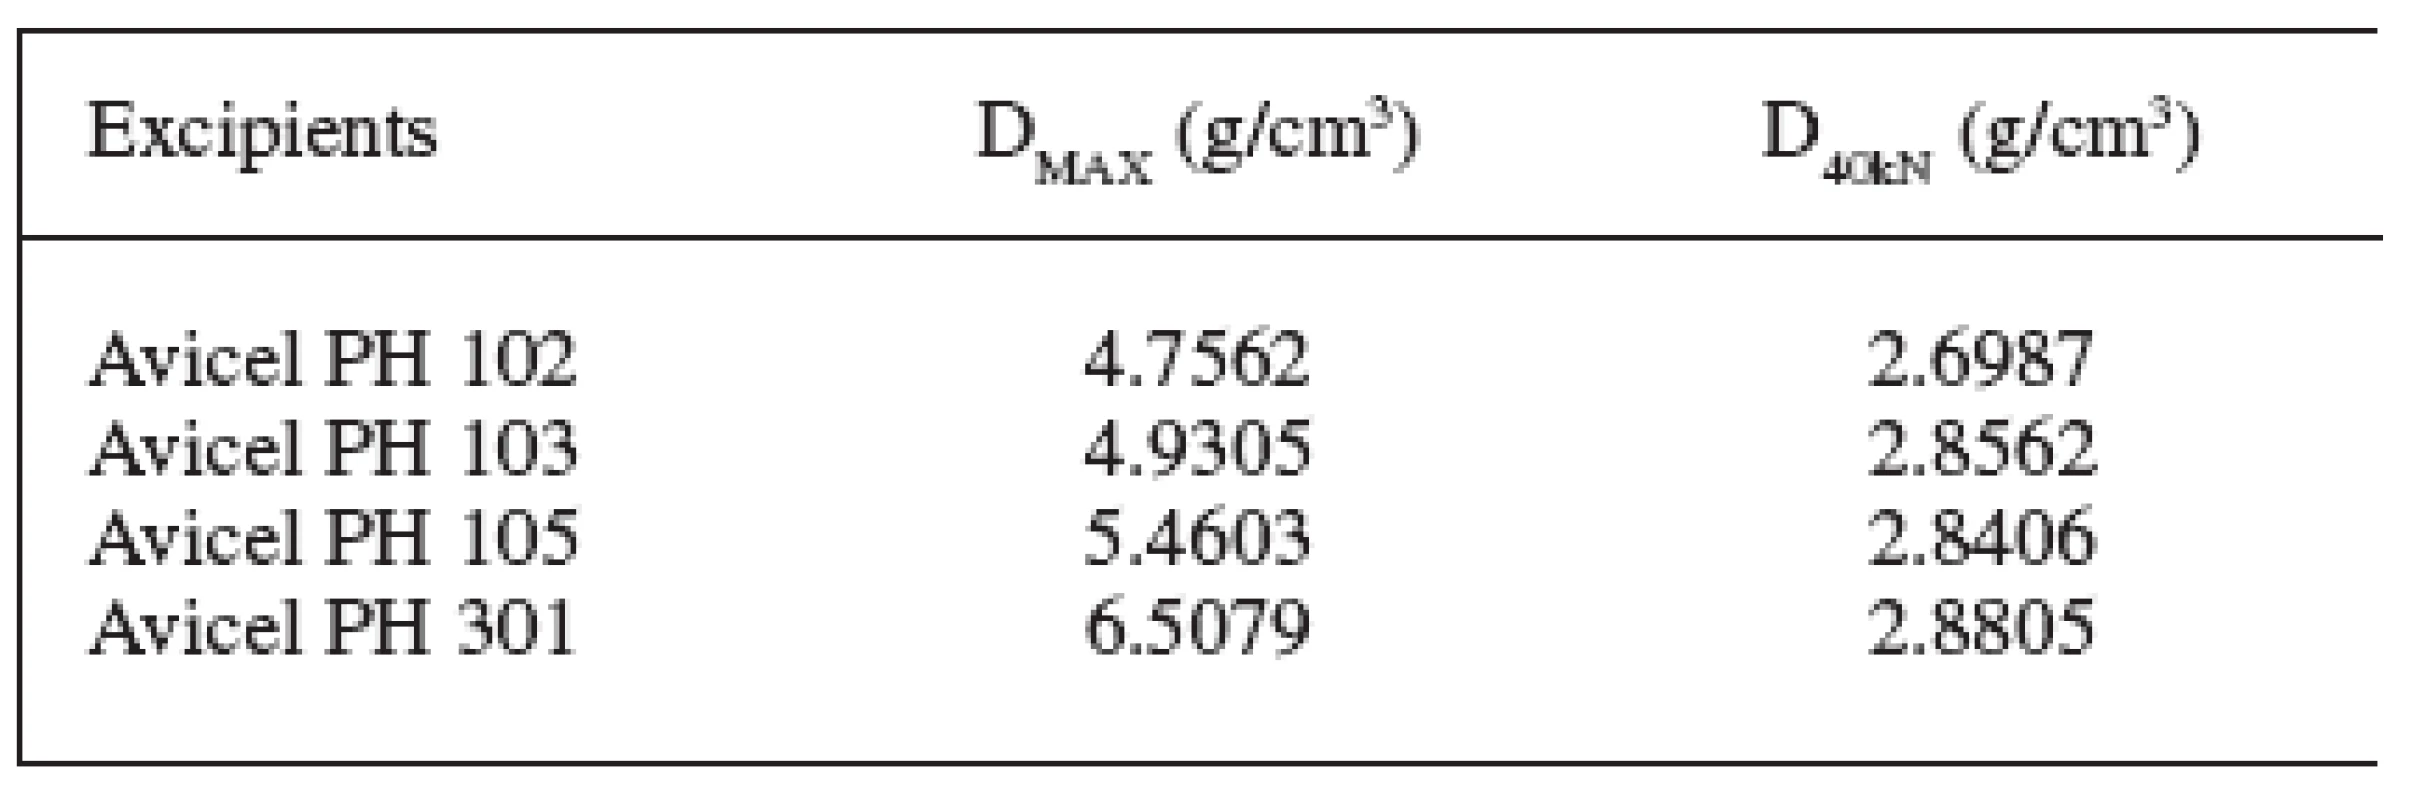 Comparison of densities in the excipients under study (abbreviations of densities are explained in the paper)